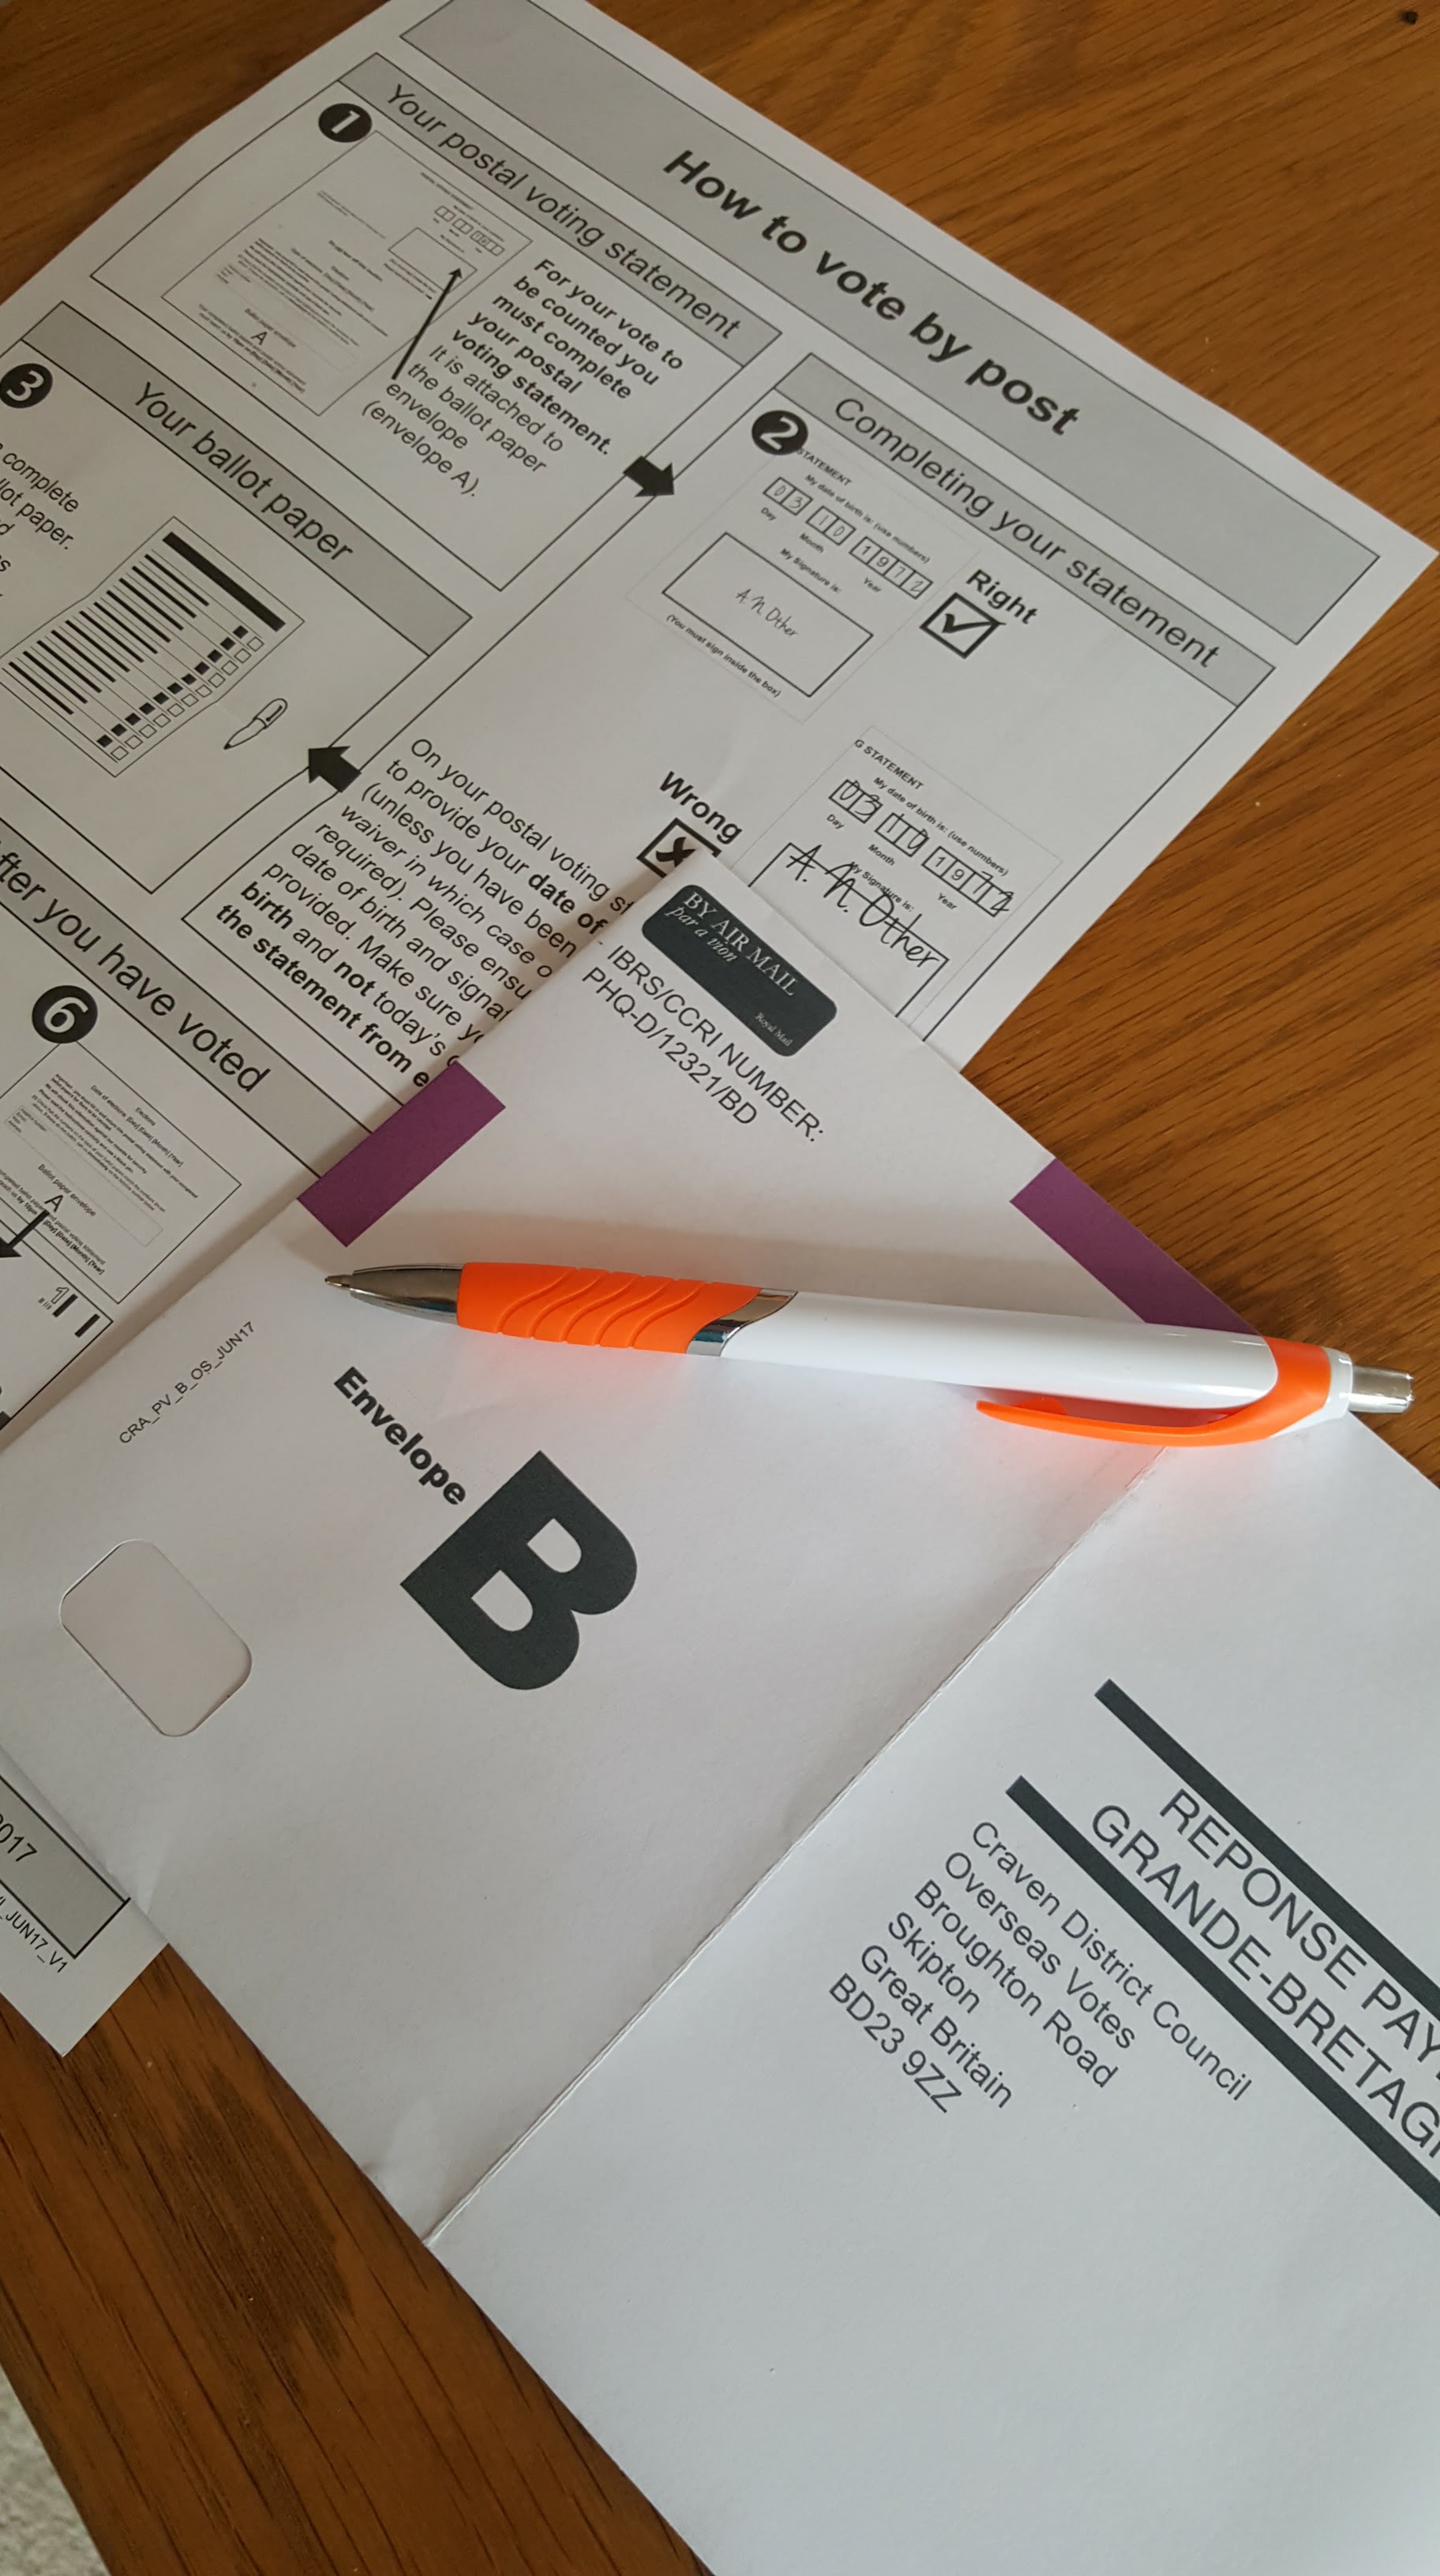 postal voting papers and a pen